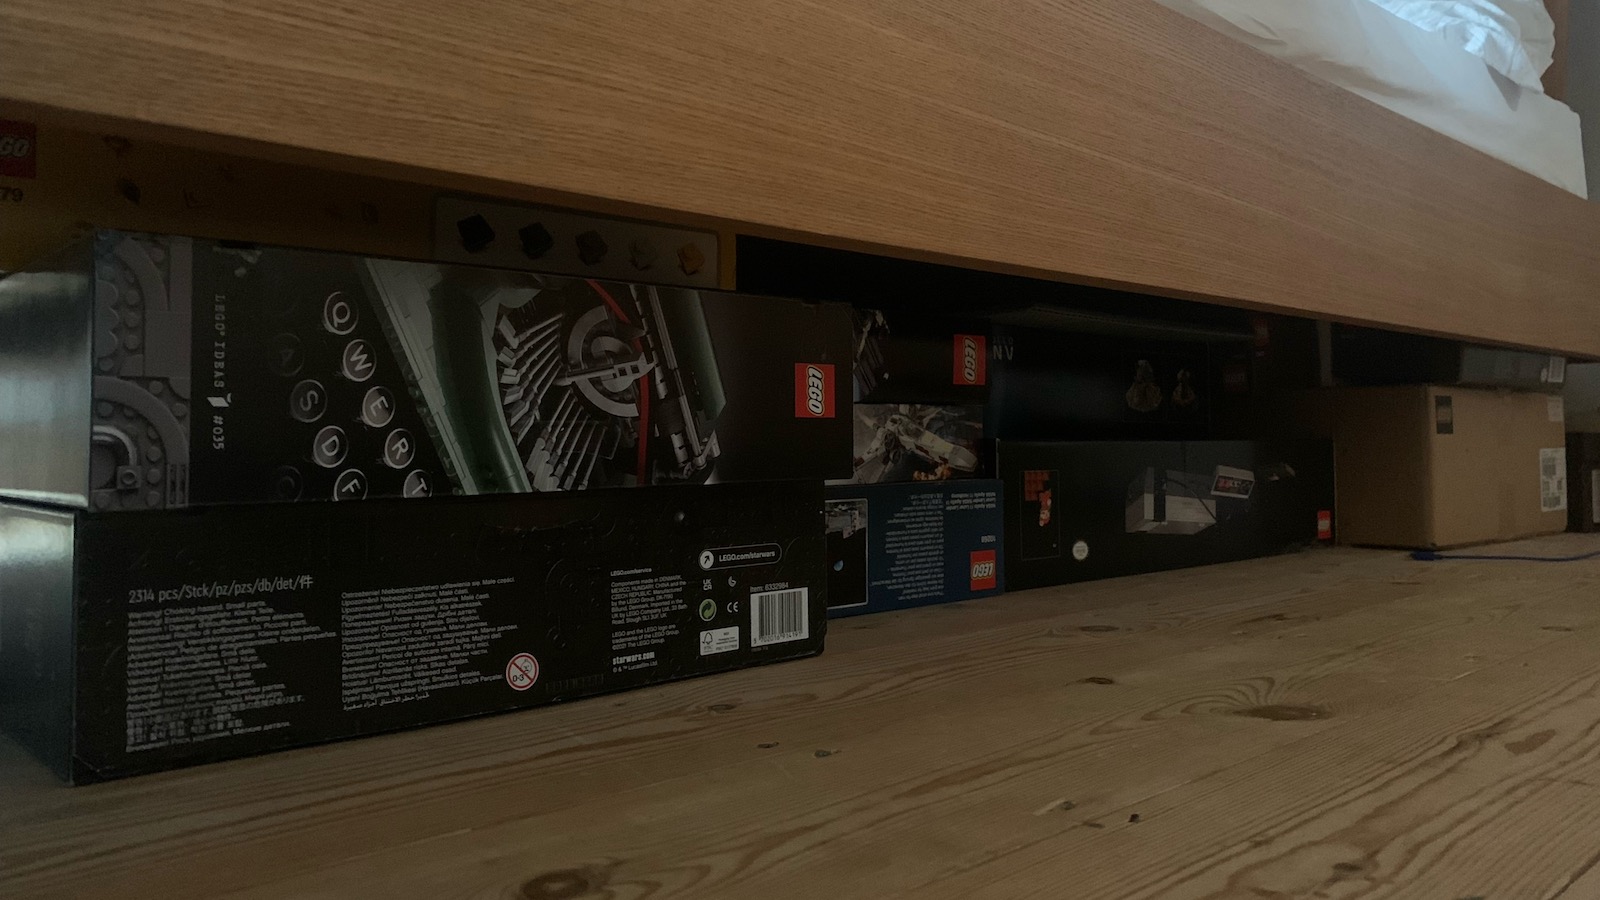 Josie's dad's impressive Lego collection stashed underneath his bed